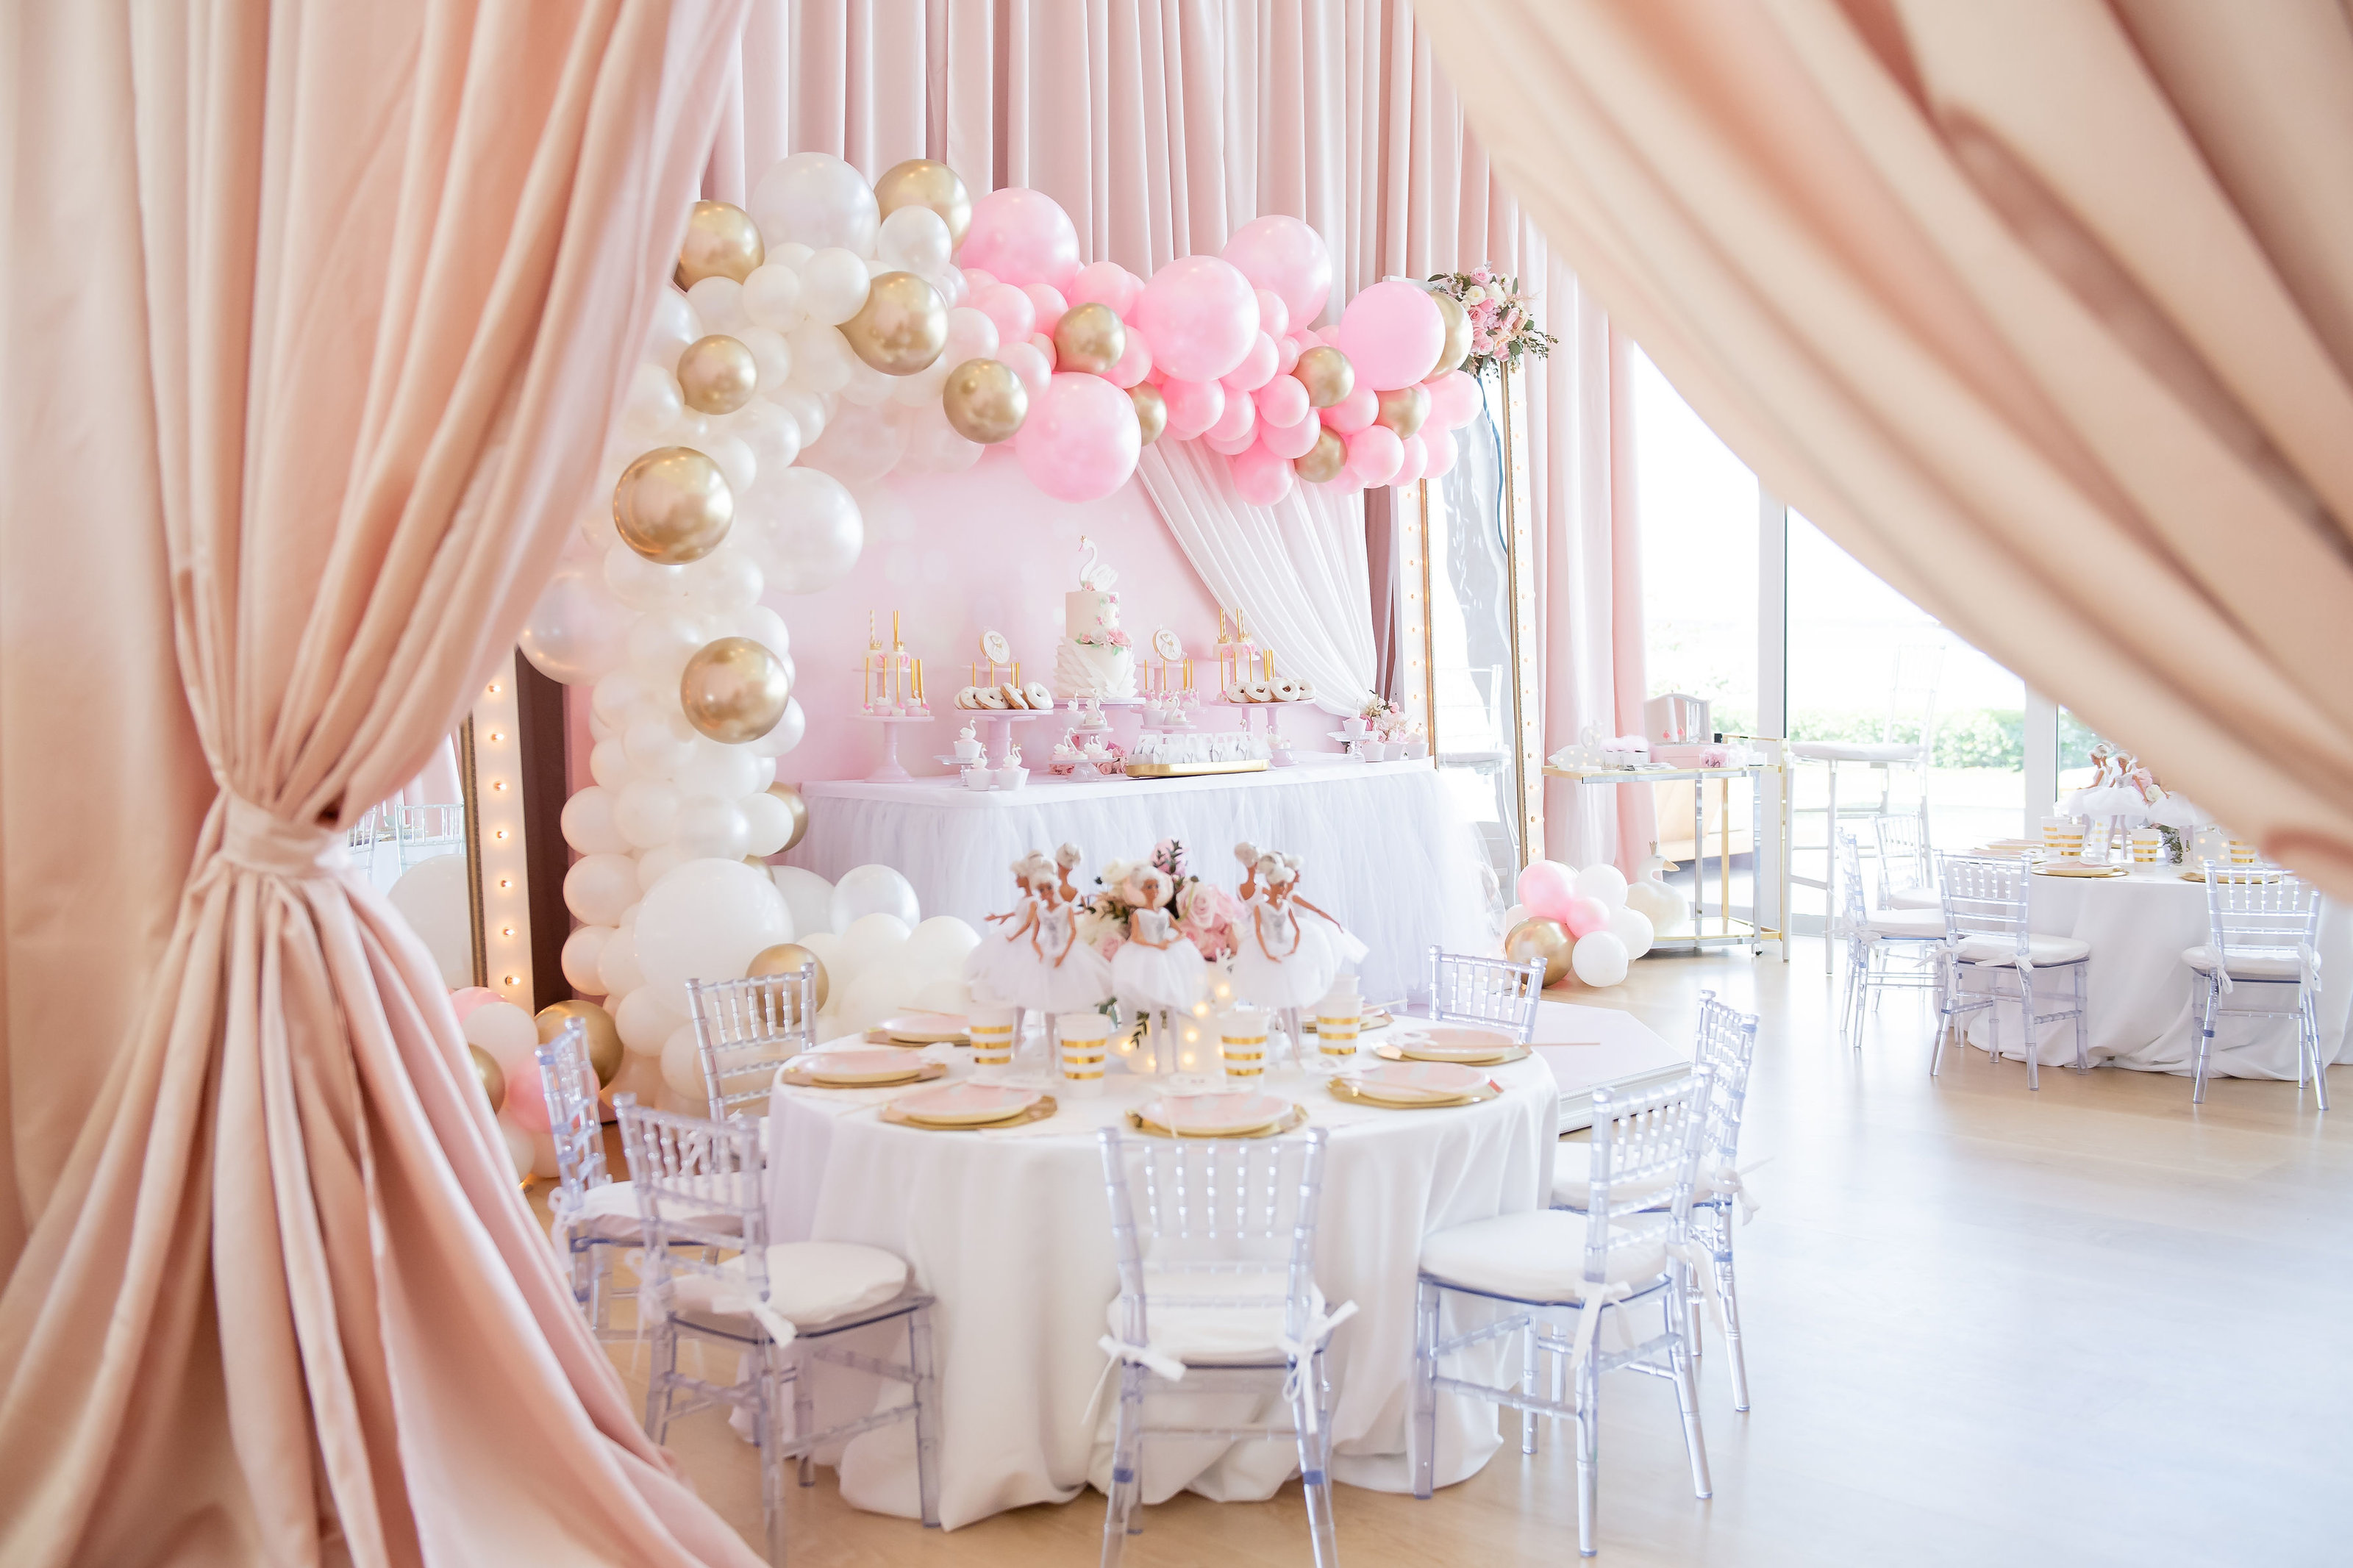 miami-event-planner-one-inspired-party-north-bay-road-31